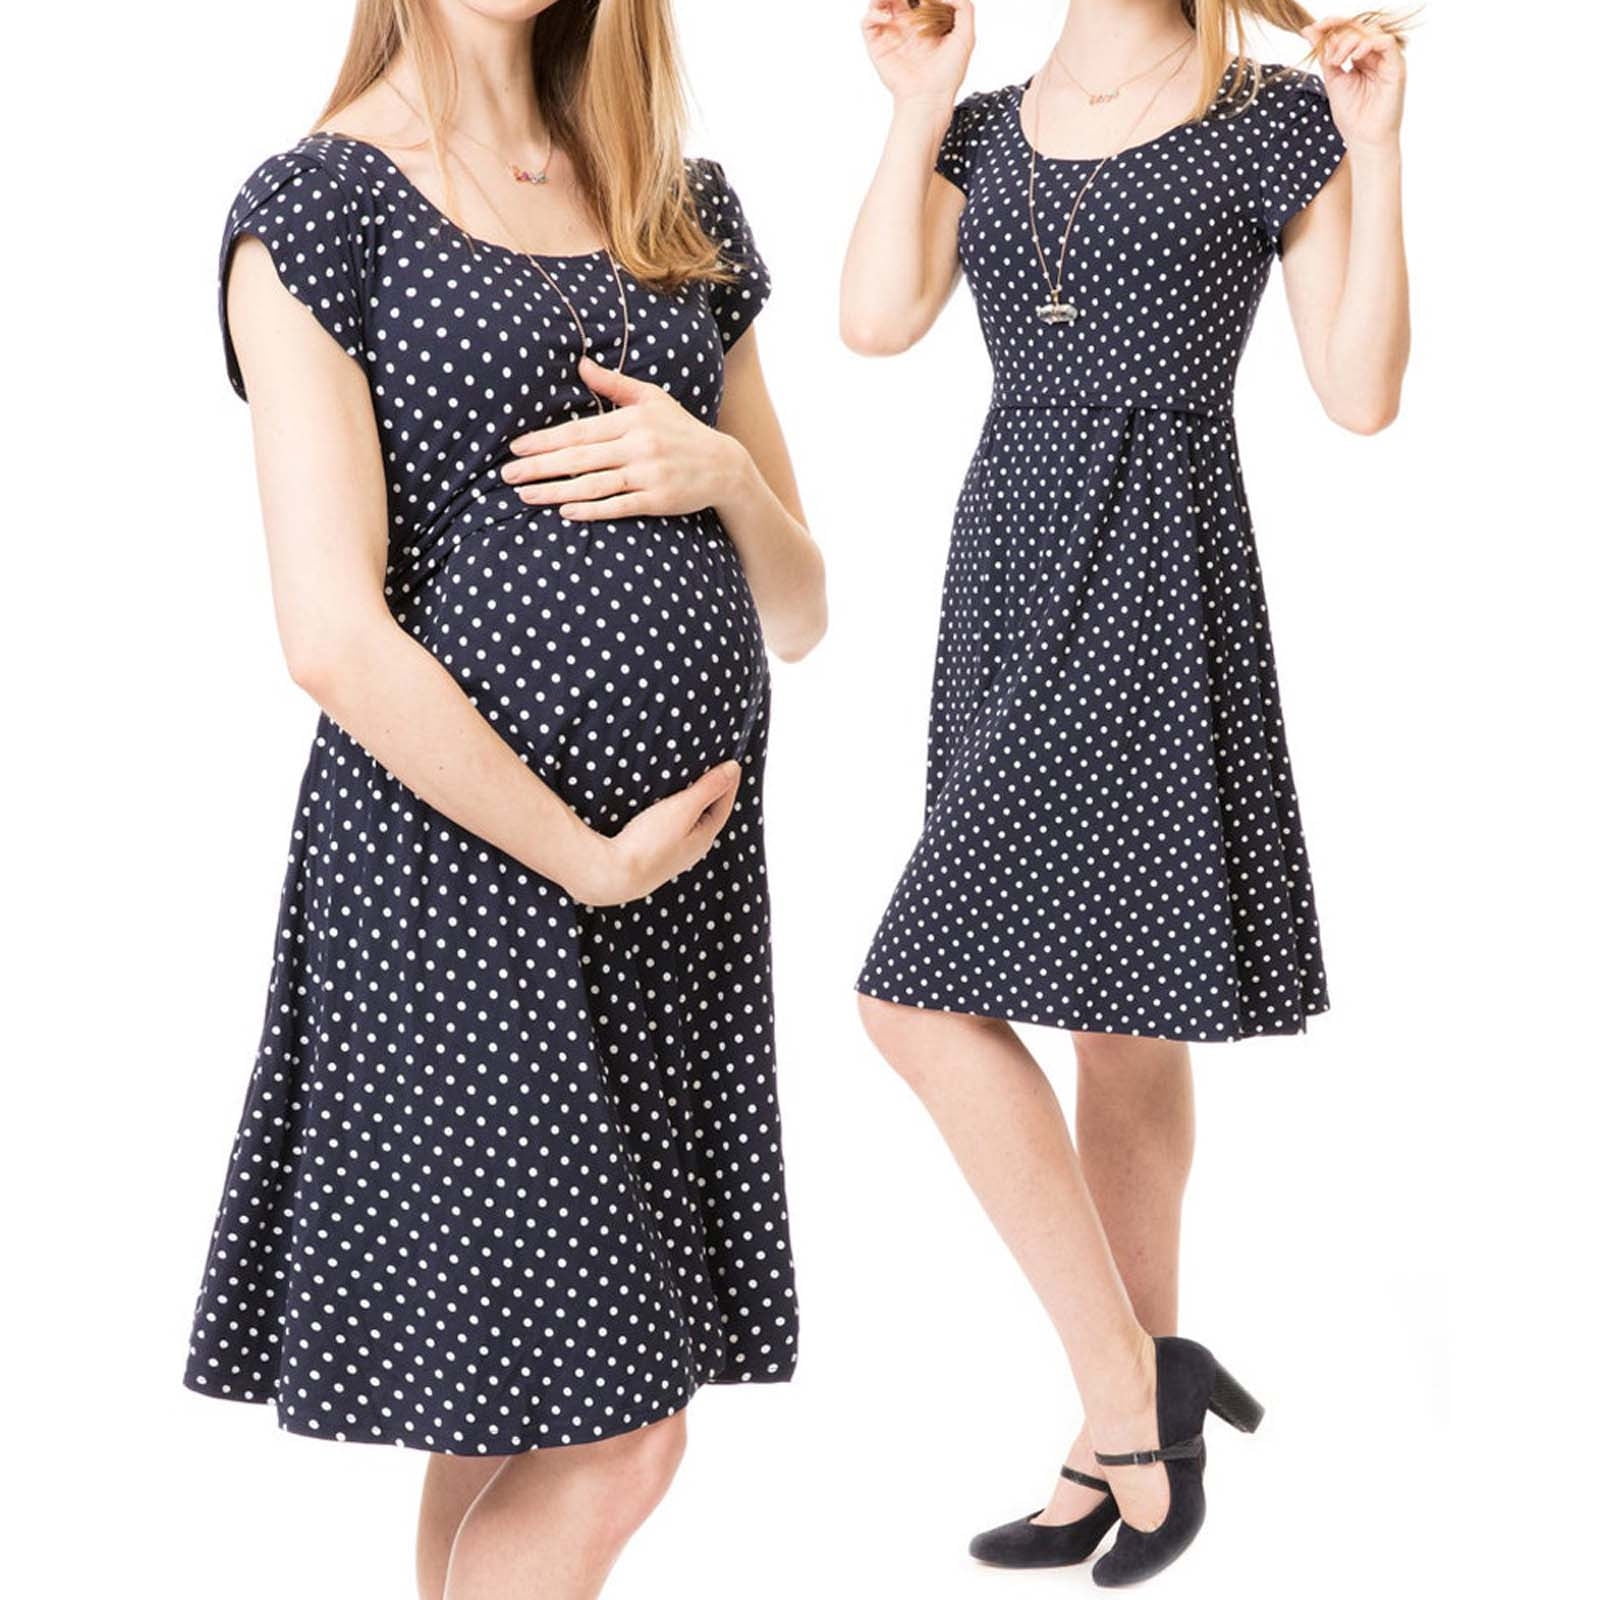 Giligiliso Clearance Maternity Clothes for Women Ladies Multifunctional ...